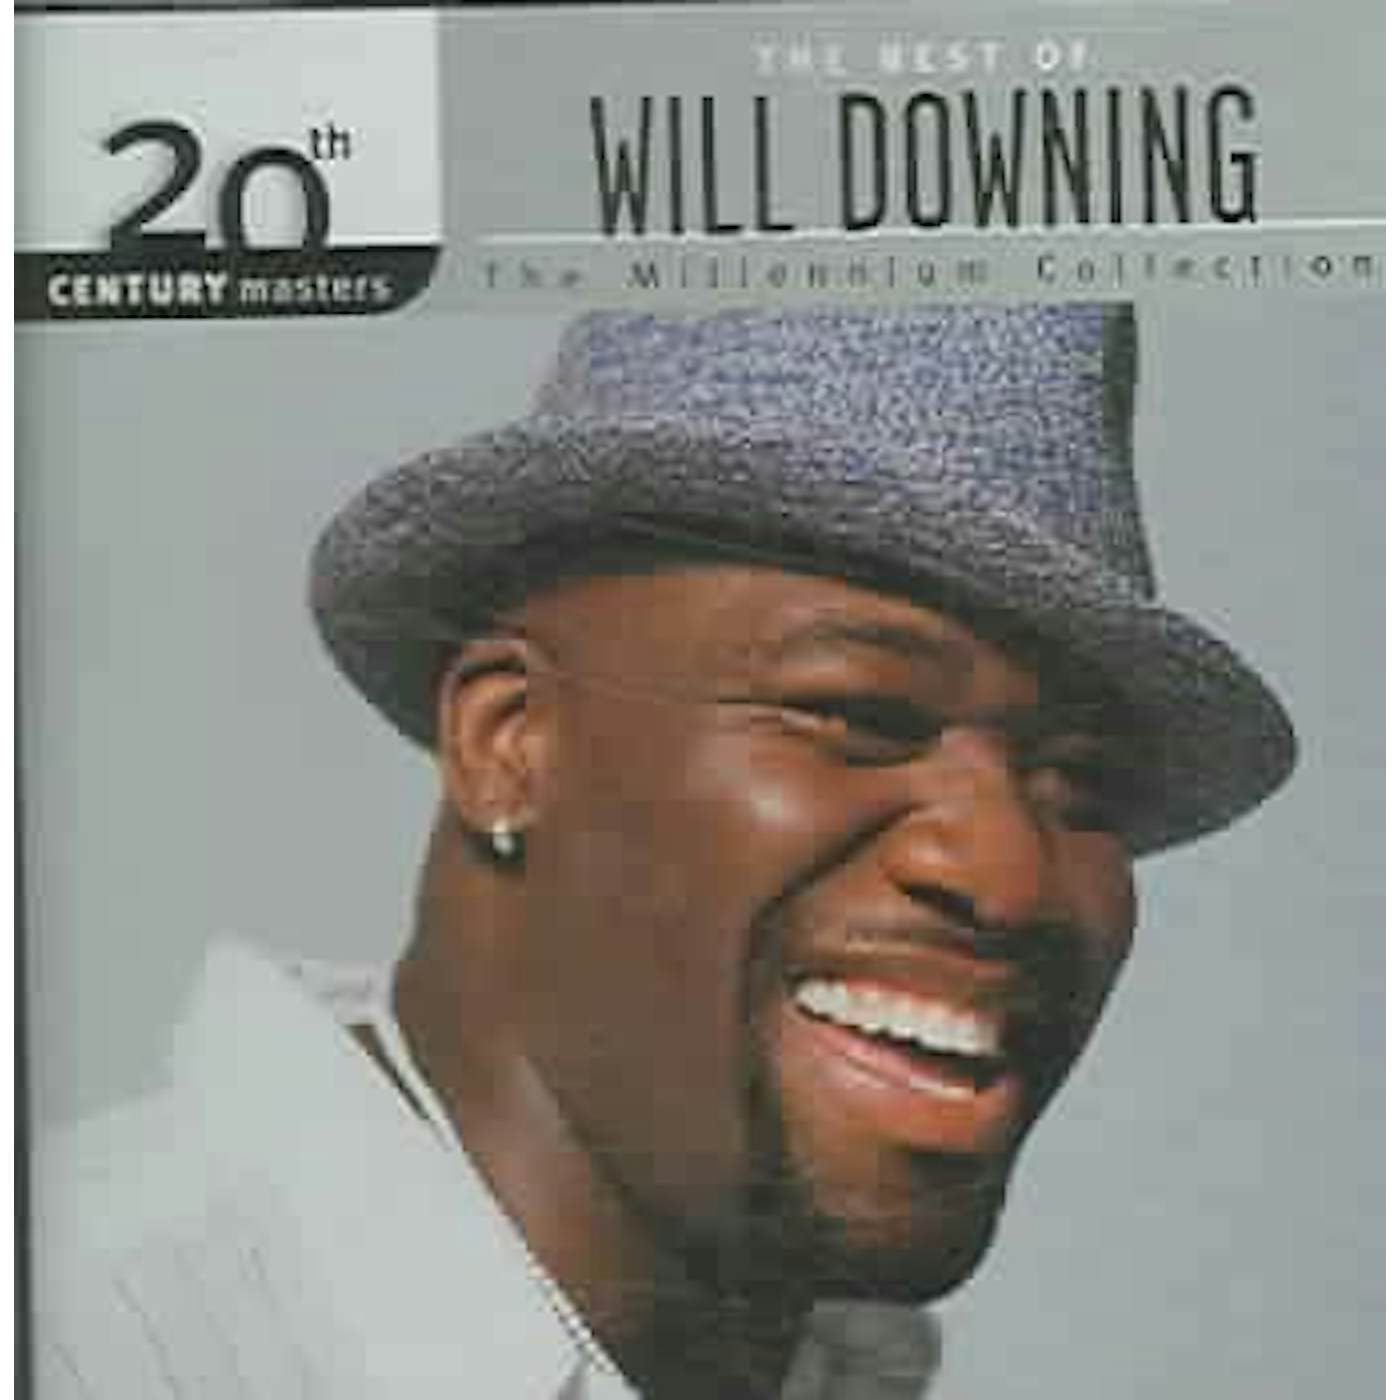 Will Downing MILLENNIUM COLLECTION: 20TH CENTURY MASTERS CD